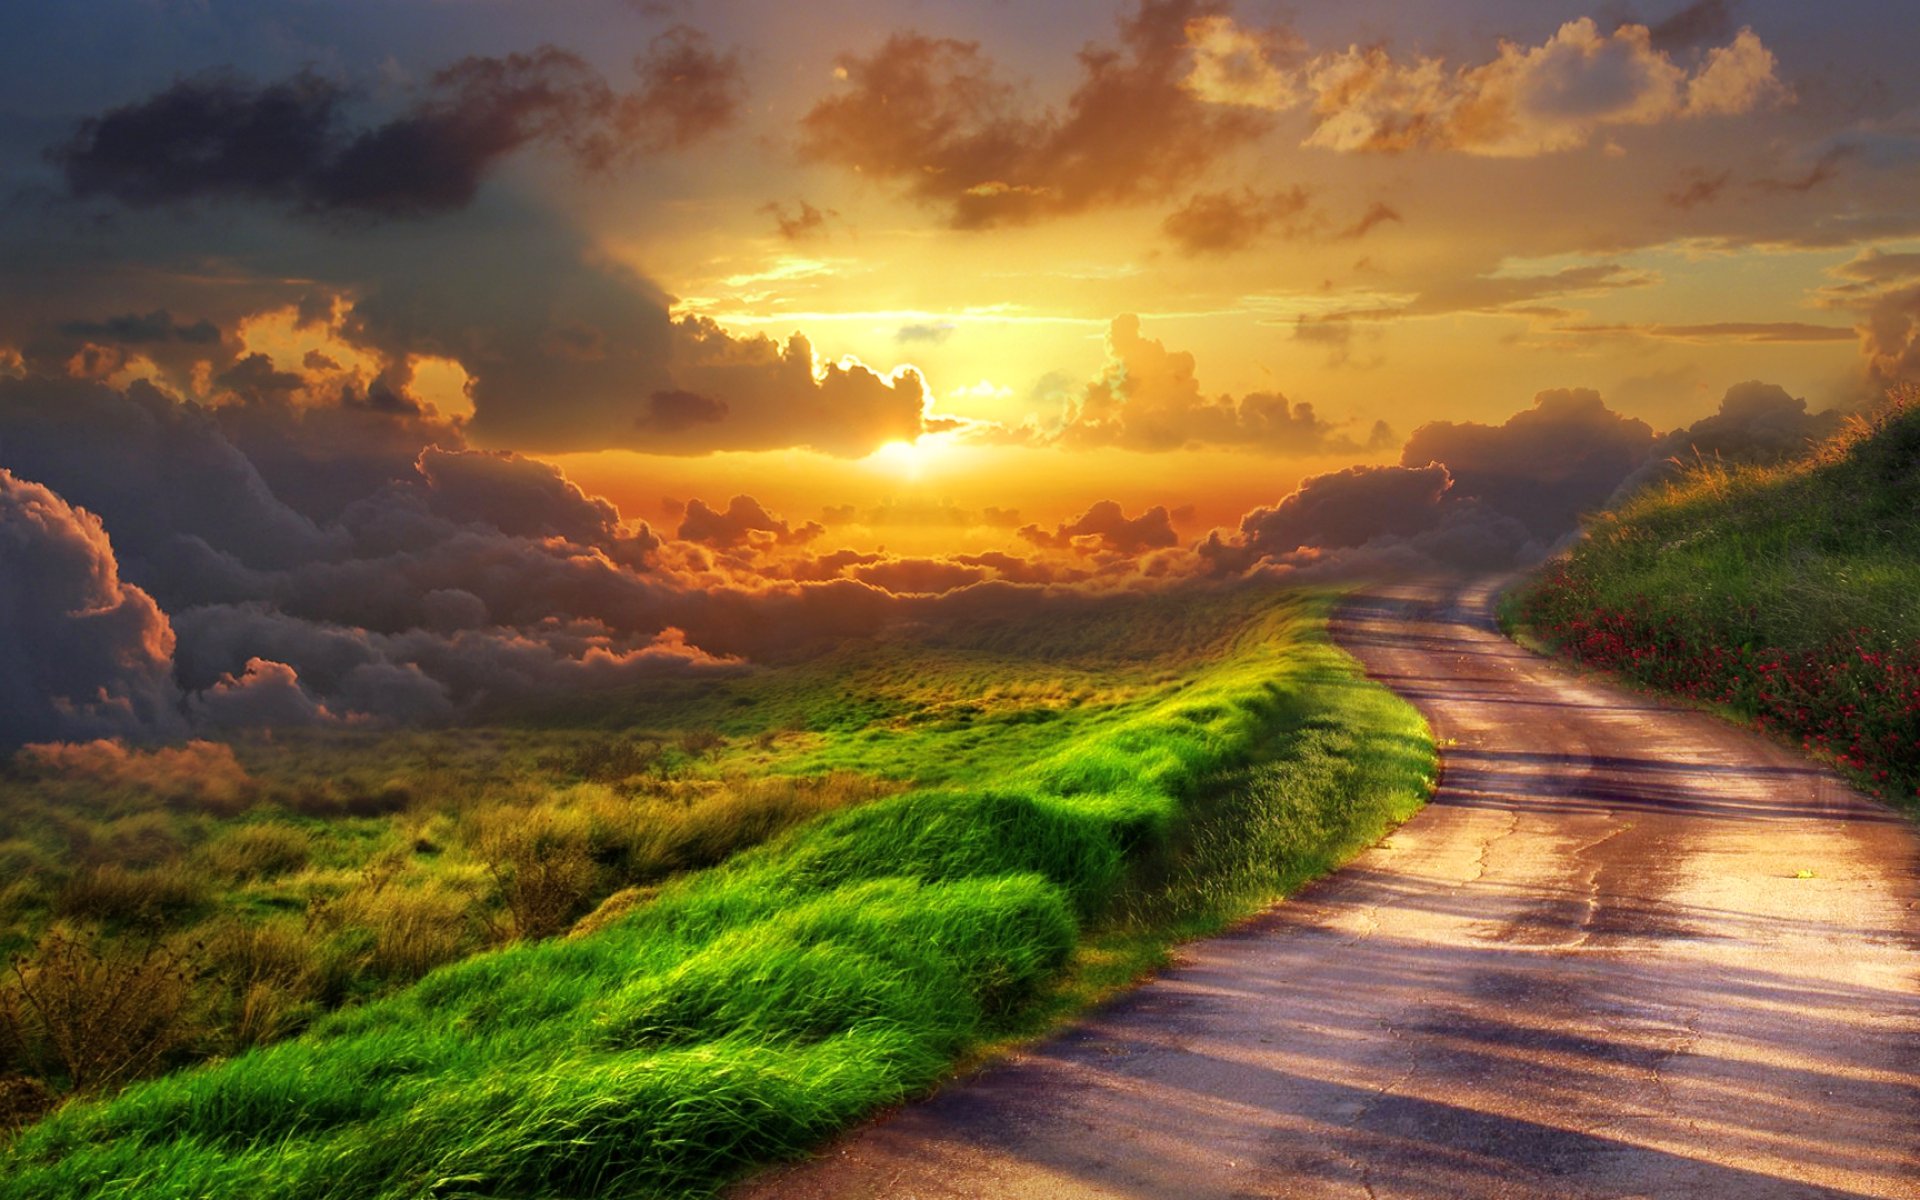 Stairway To Heaven HD Wallpapers - HD Wallpapers Backgrounds of